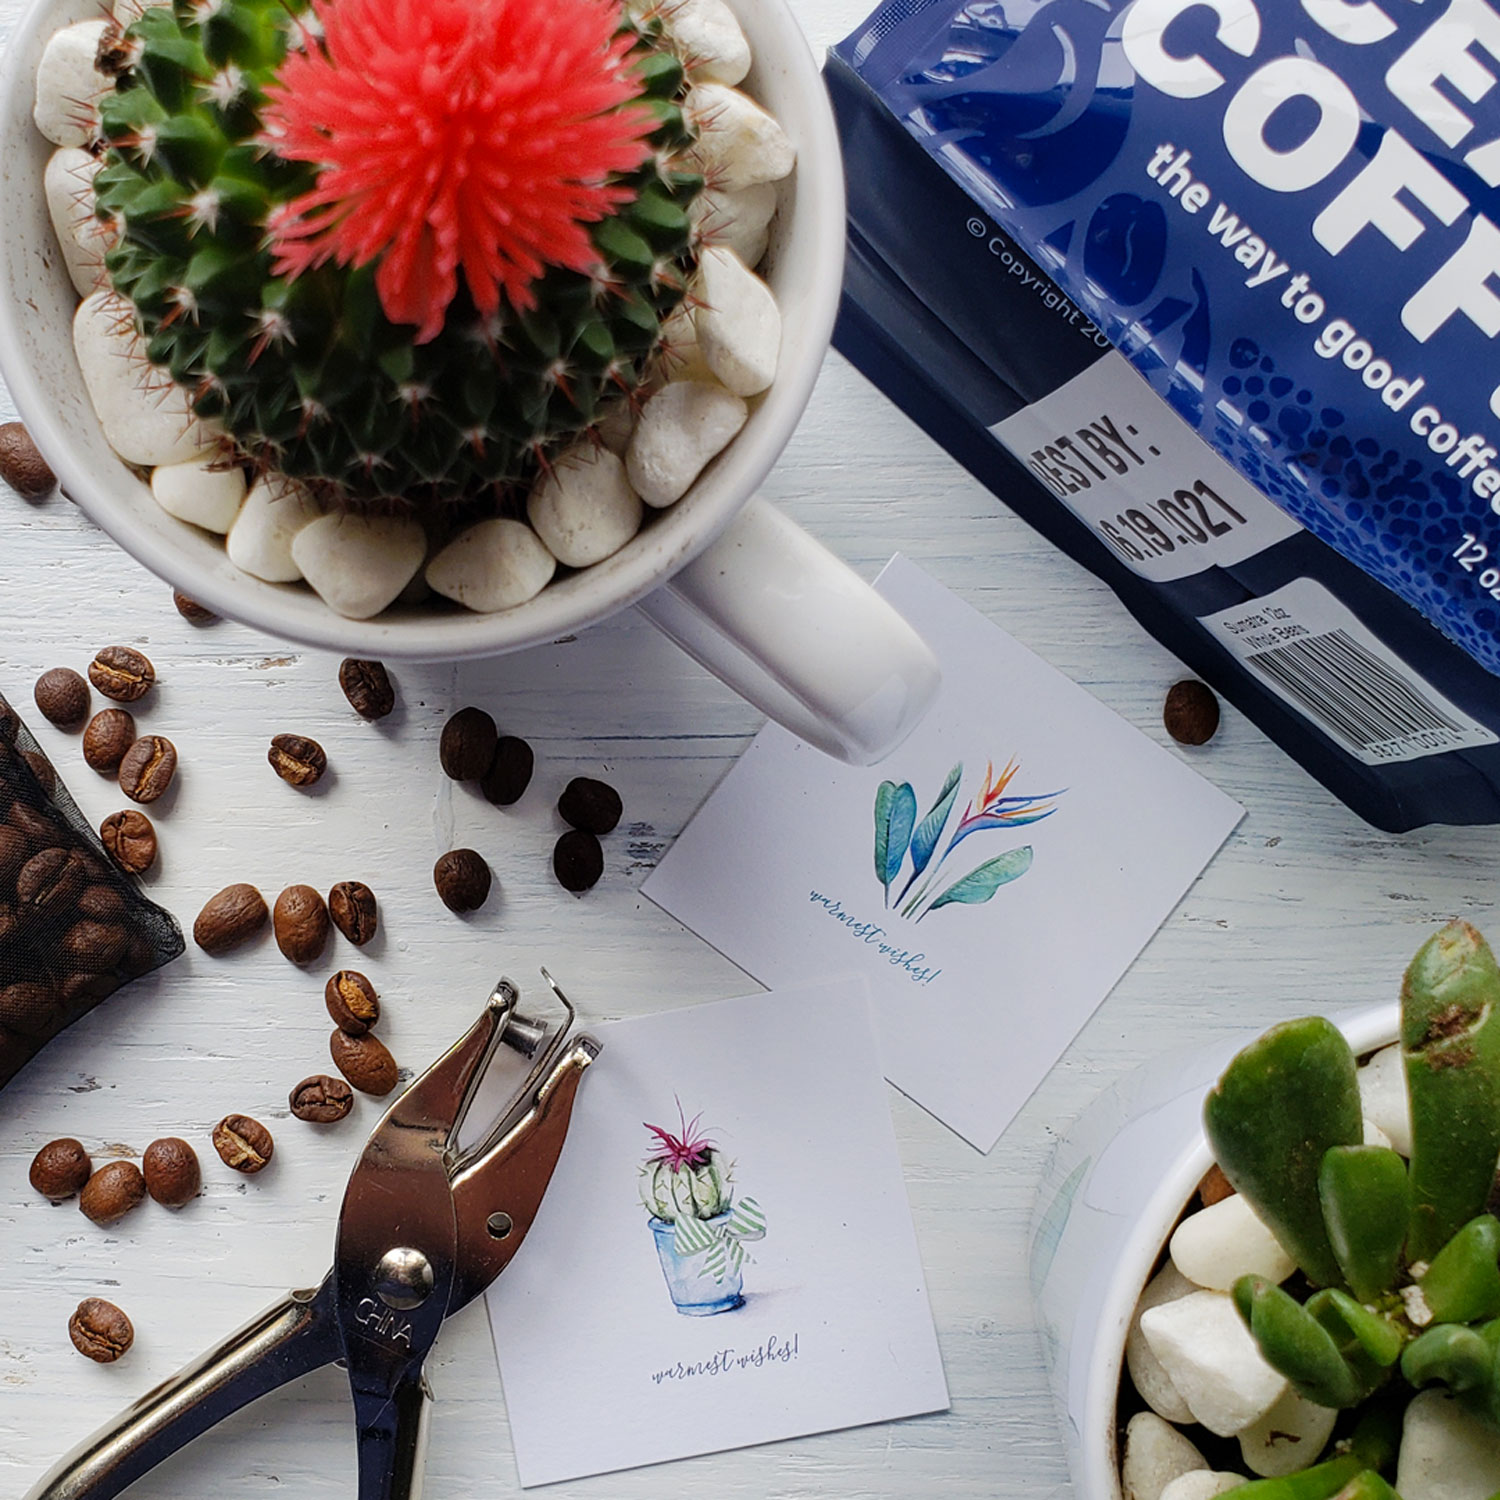 DIY coffee gifts uses gift tags designed with a replica of my original watercolor art, coffee beans in a bag, and a succulent or cacti planted in a coffee mug. 